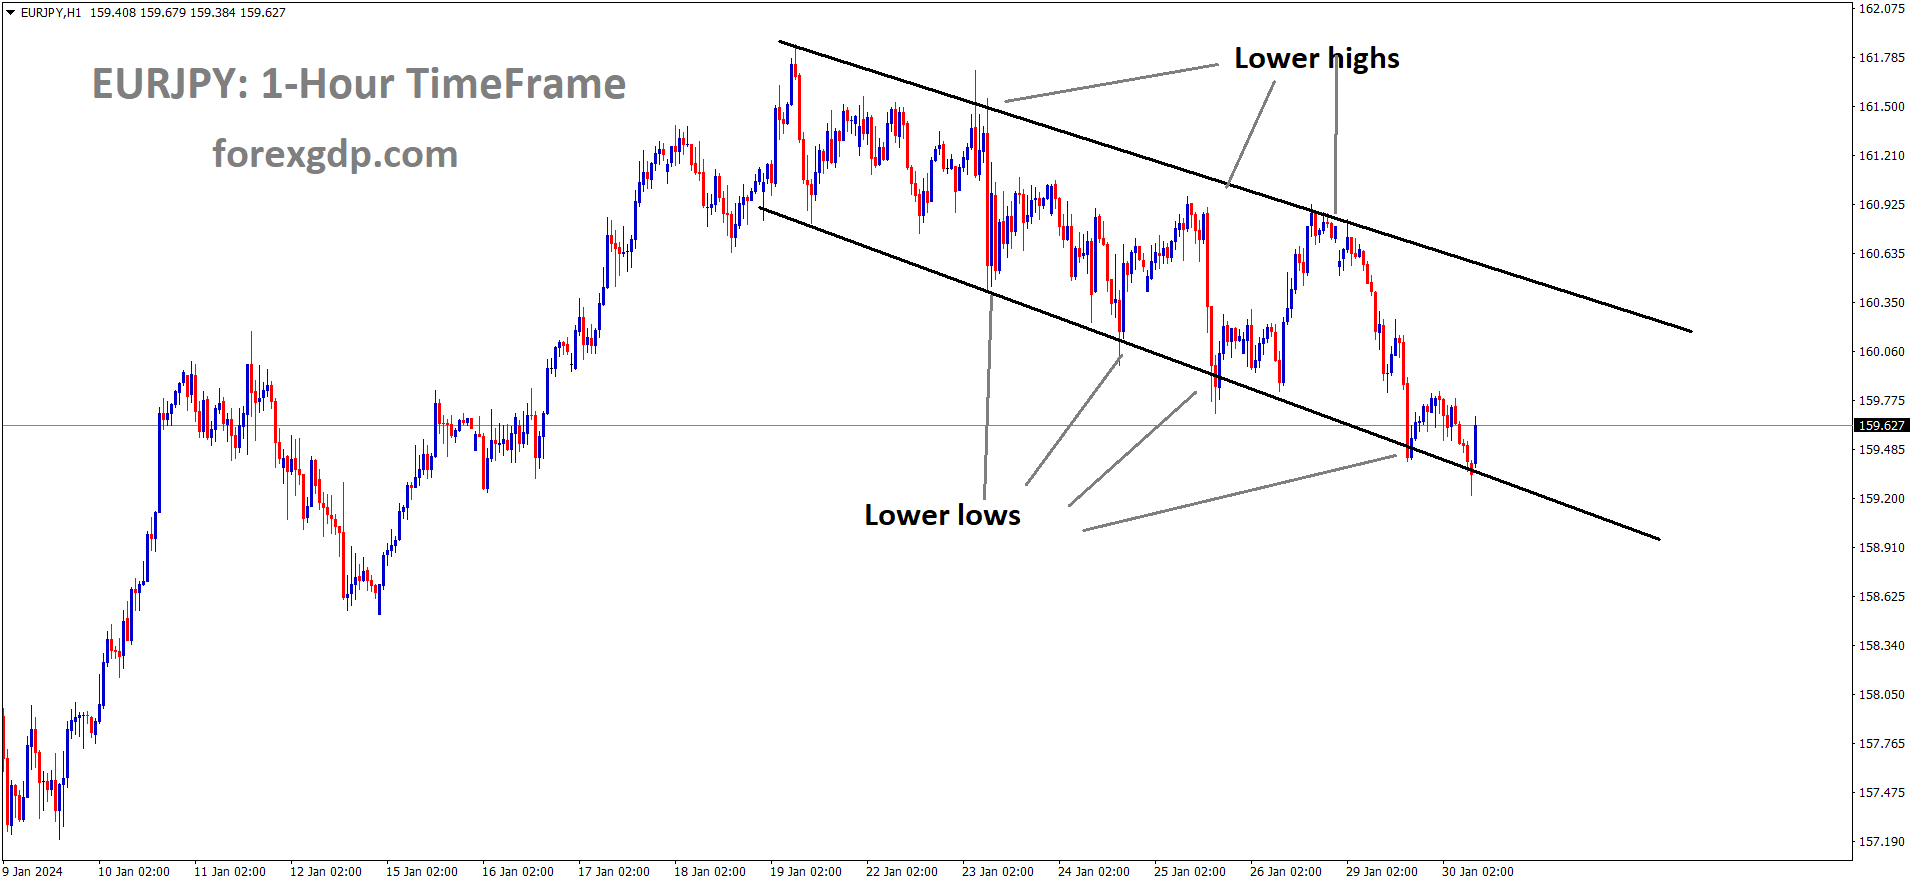 EURJPY is moving in the Descending channel and the market has rebounded from the lower low area of the channel